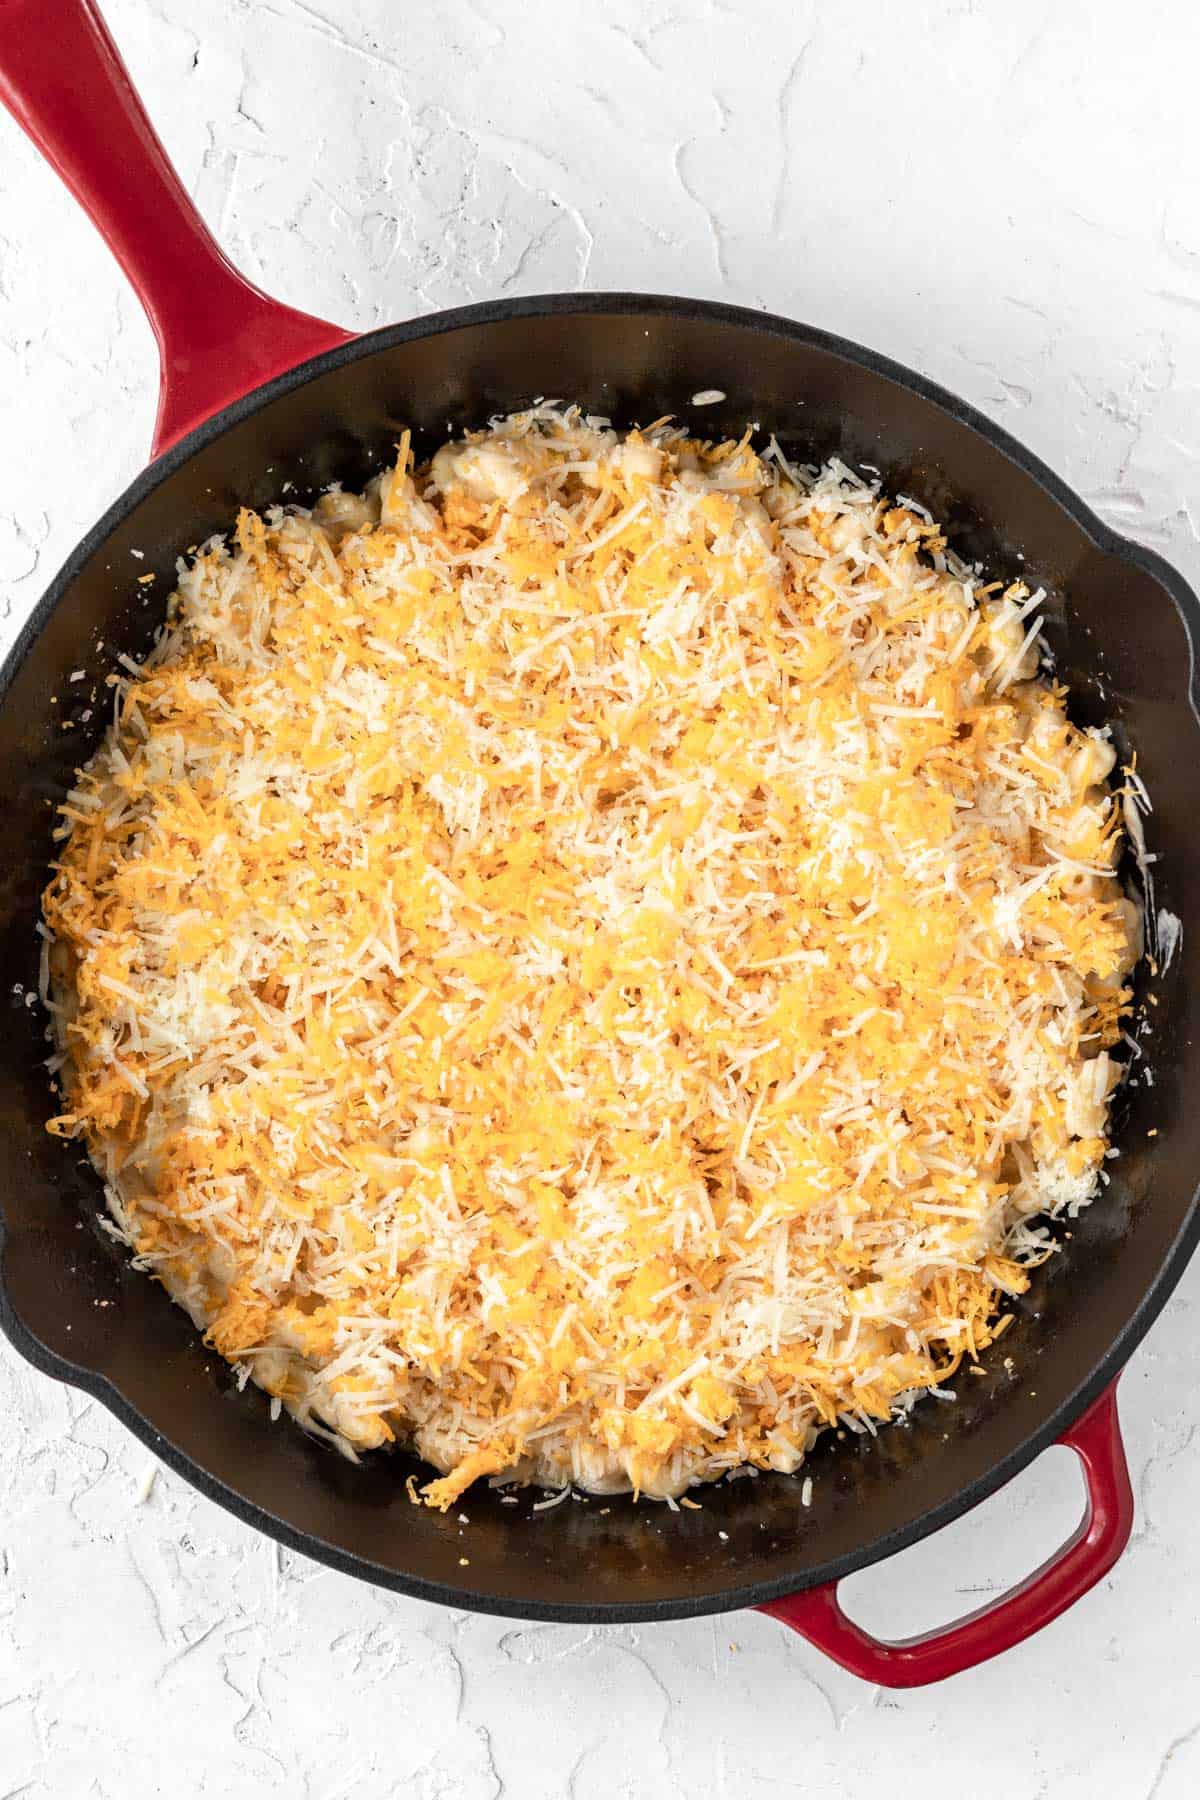 Pasta noodles covered in cheese sauce layered with more freshly grated cheese in a large cast iron skillet.